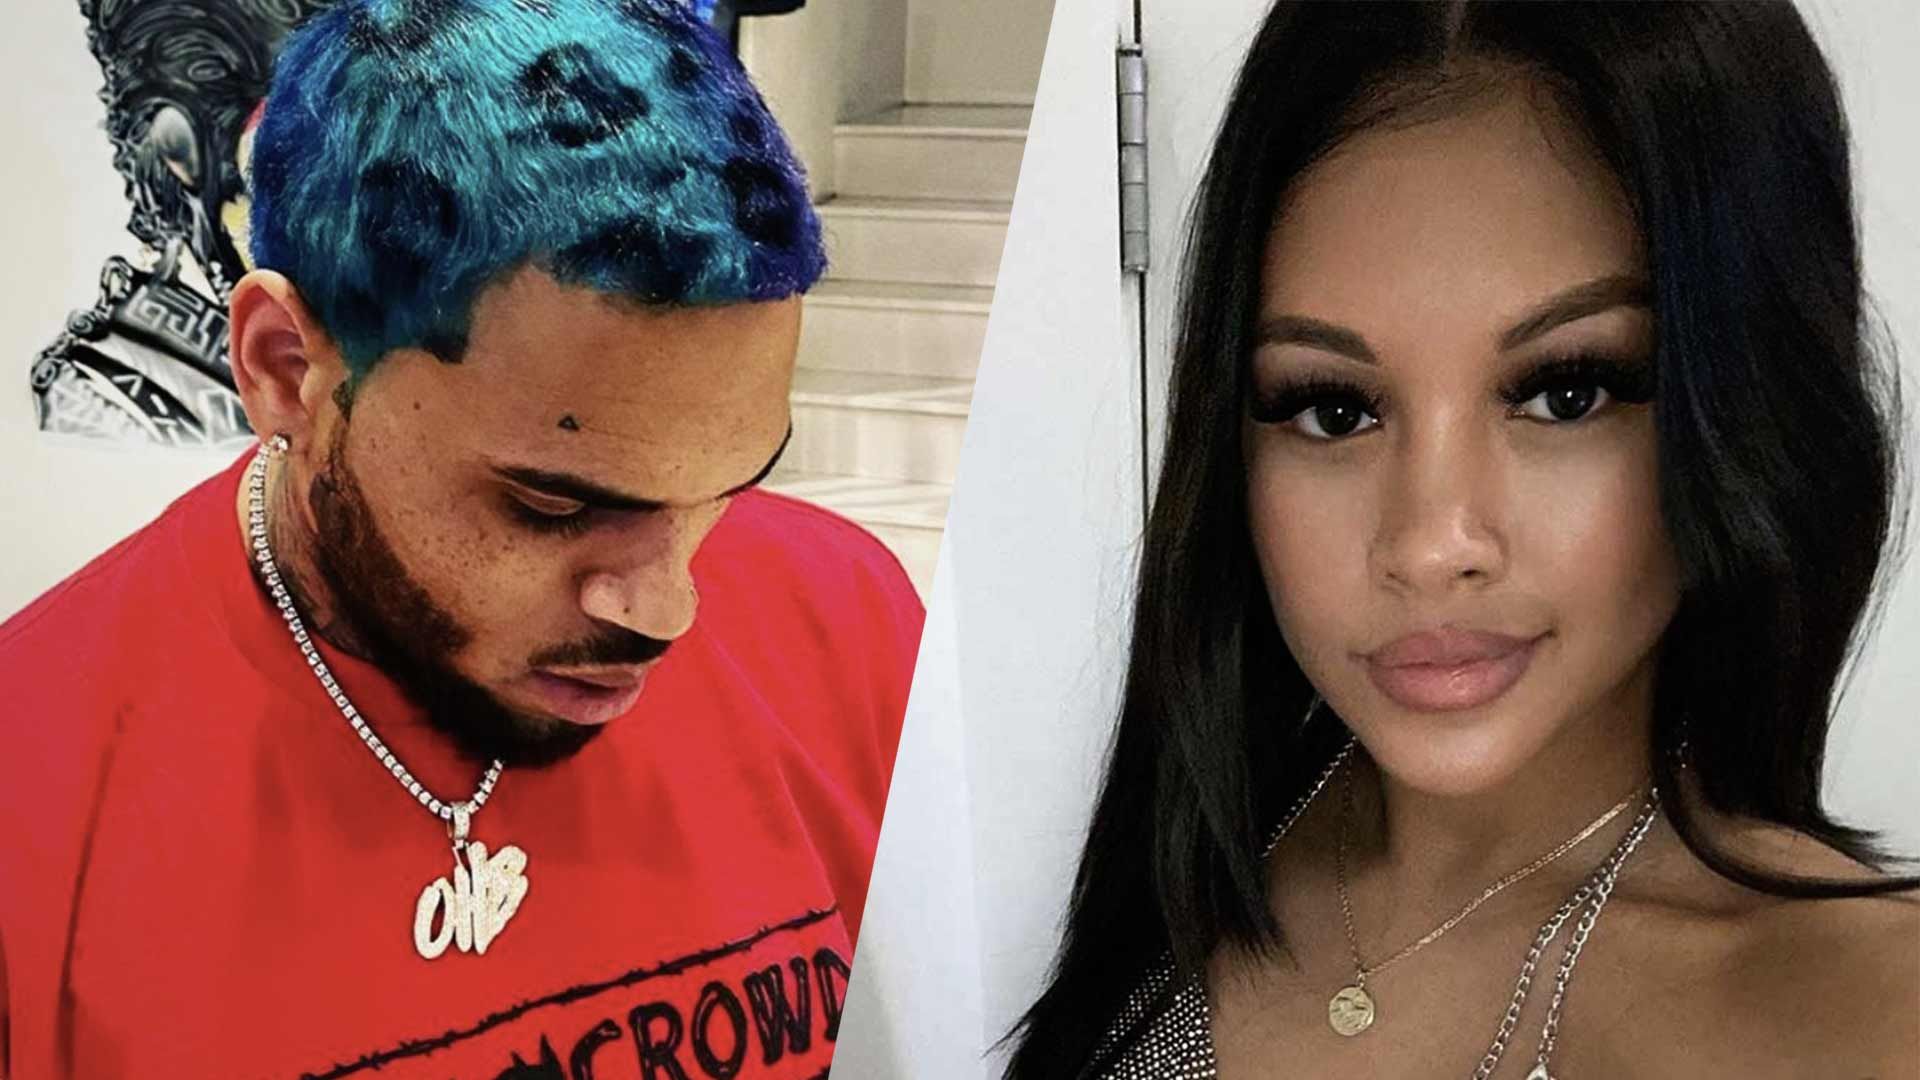 Chris Brown S Baby Mama Claps Back At Hater Who Questions If Singer Is Son ...